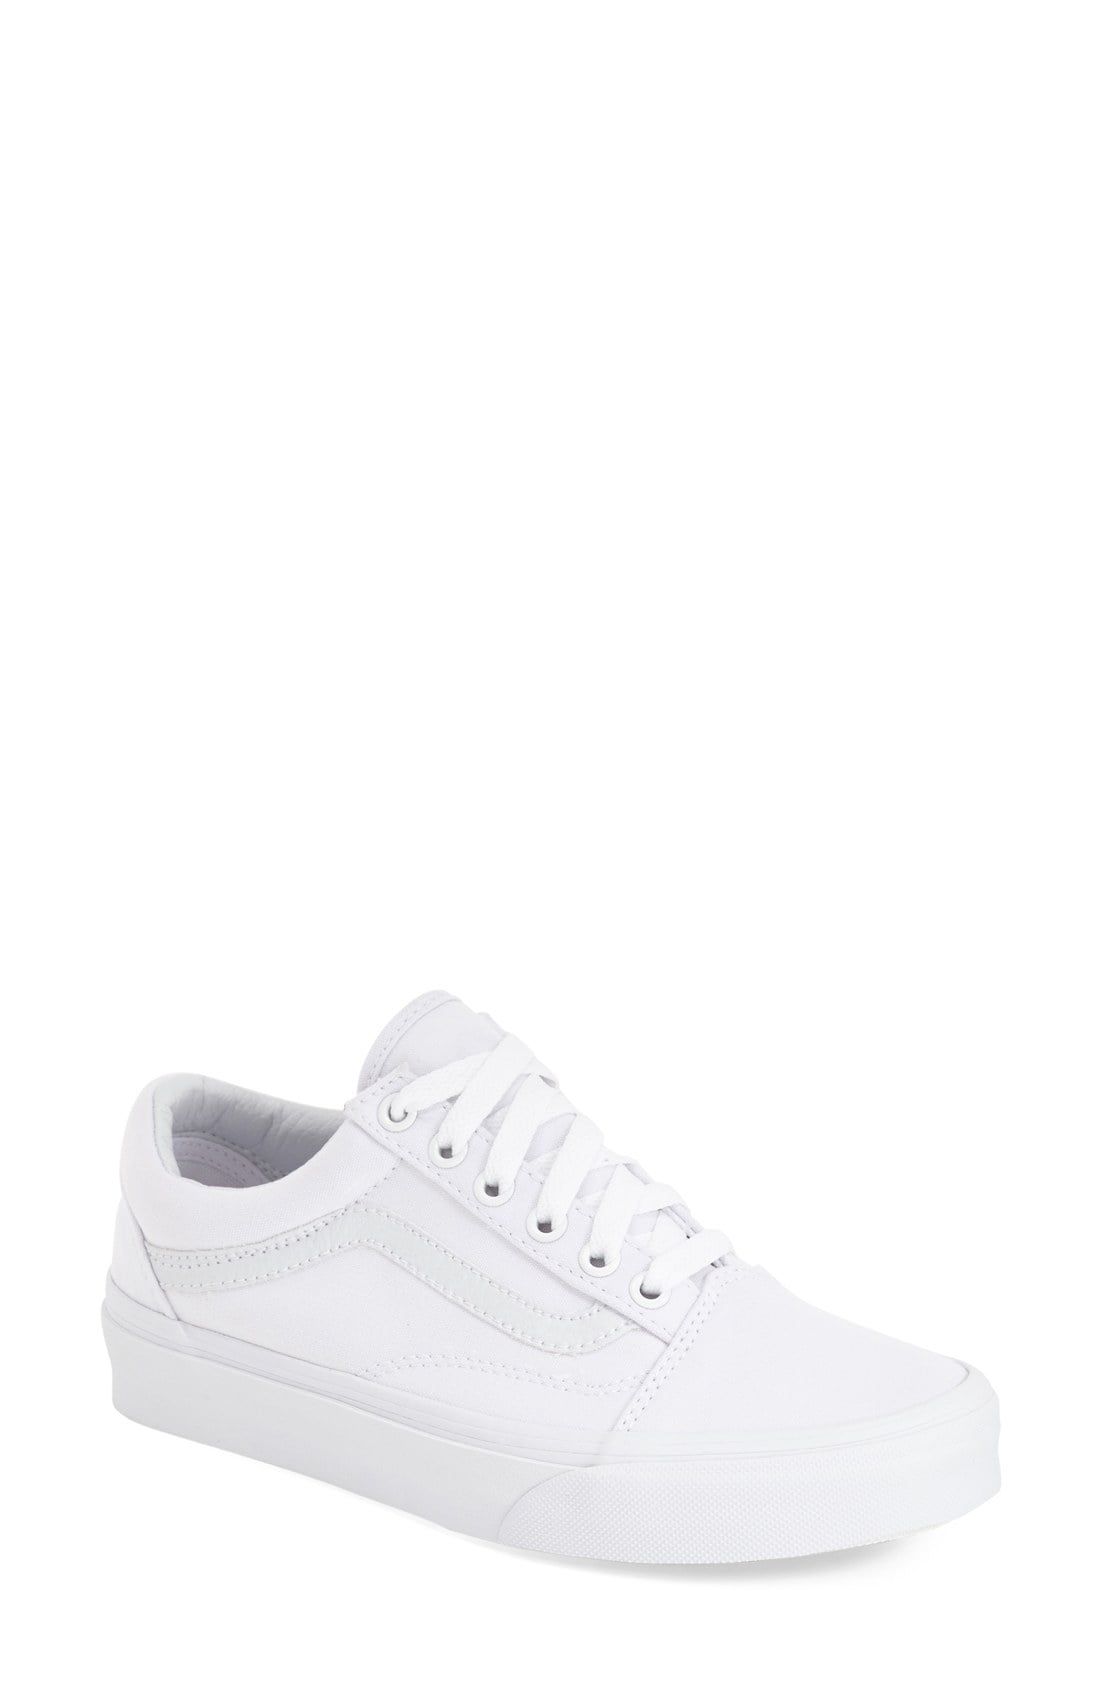 all white comfy sneakers